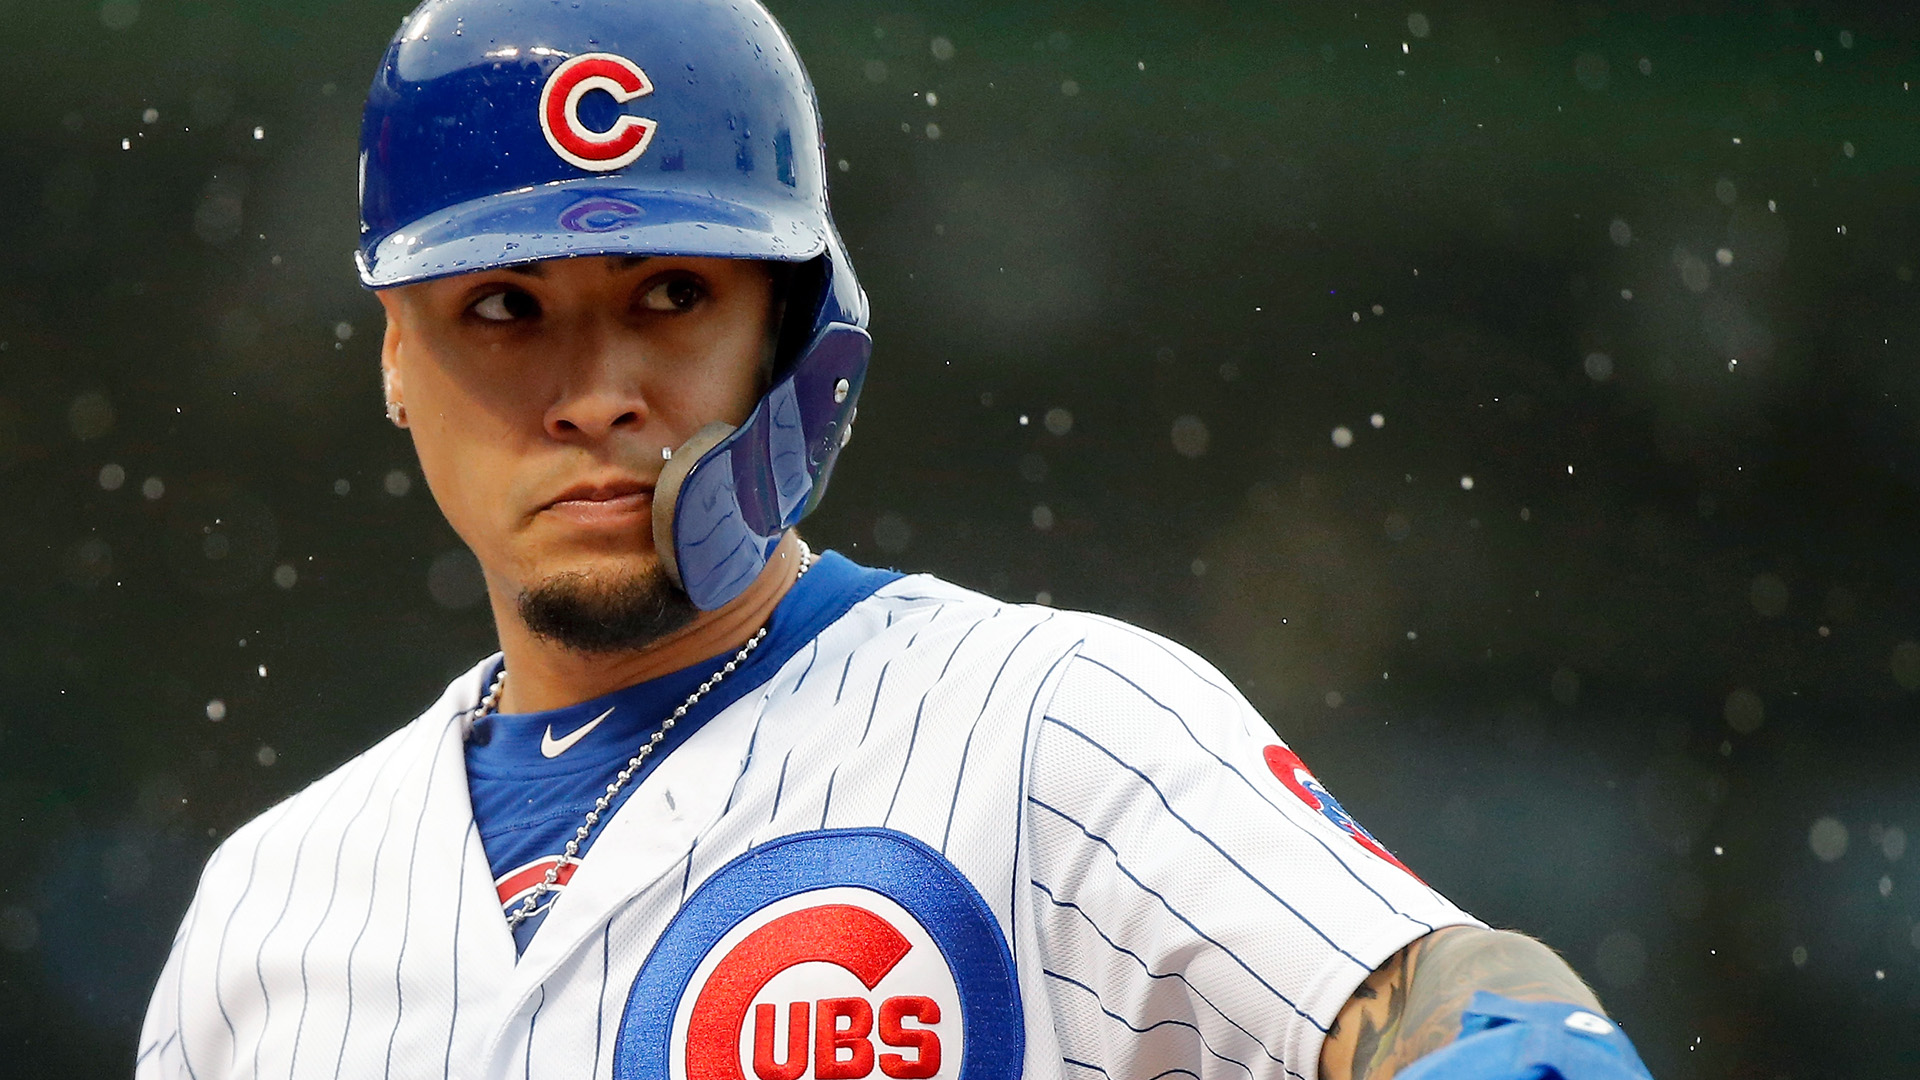 That's me being me': Javy Baez talks about just being himself